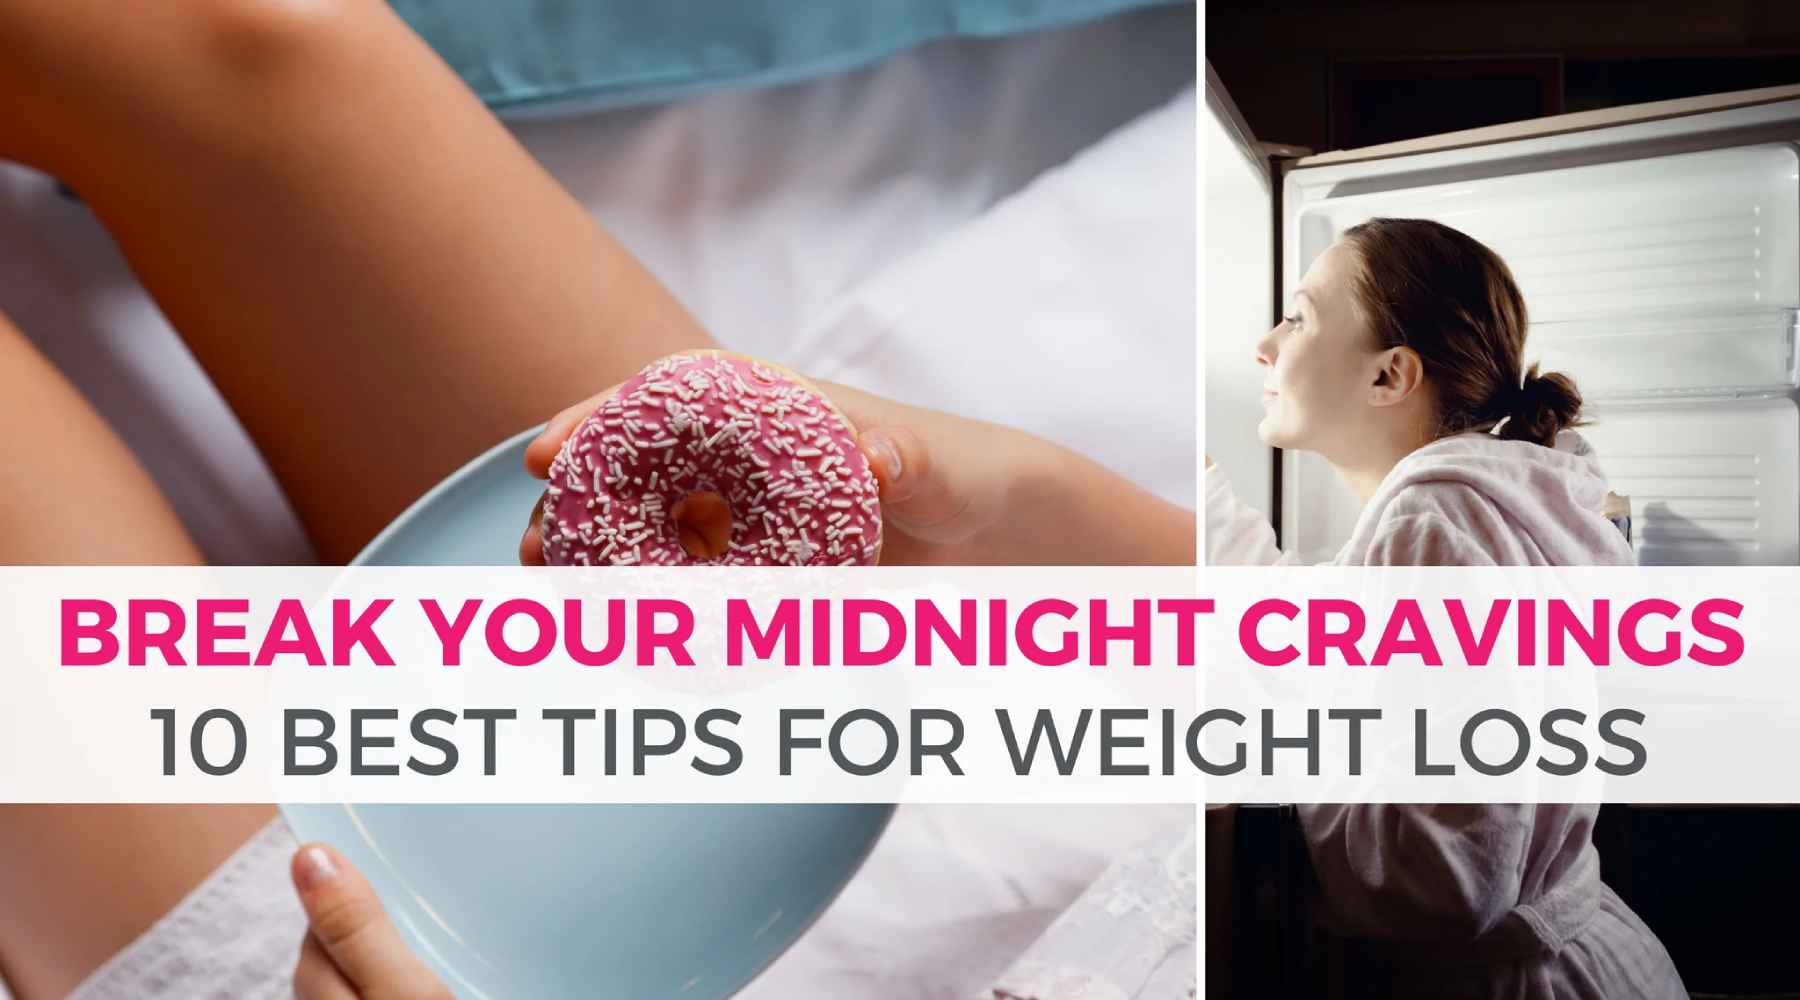 Break Your Midnight Cravings: 10 Best Tips for Weight Loss |  Eating late at night can lead to weight gain. So instead of spoiling your healthy eating plan with late night snacking, try these 10 easy ideas to help you curb those late night cravings! 